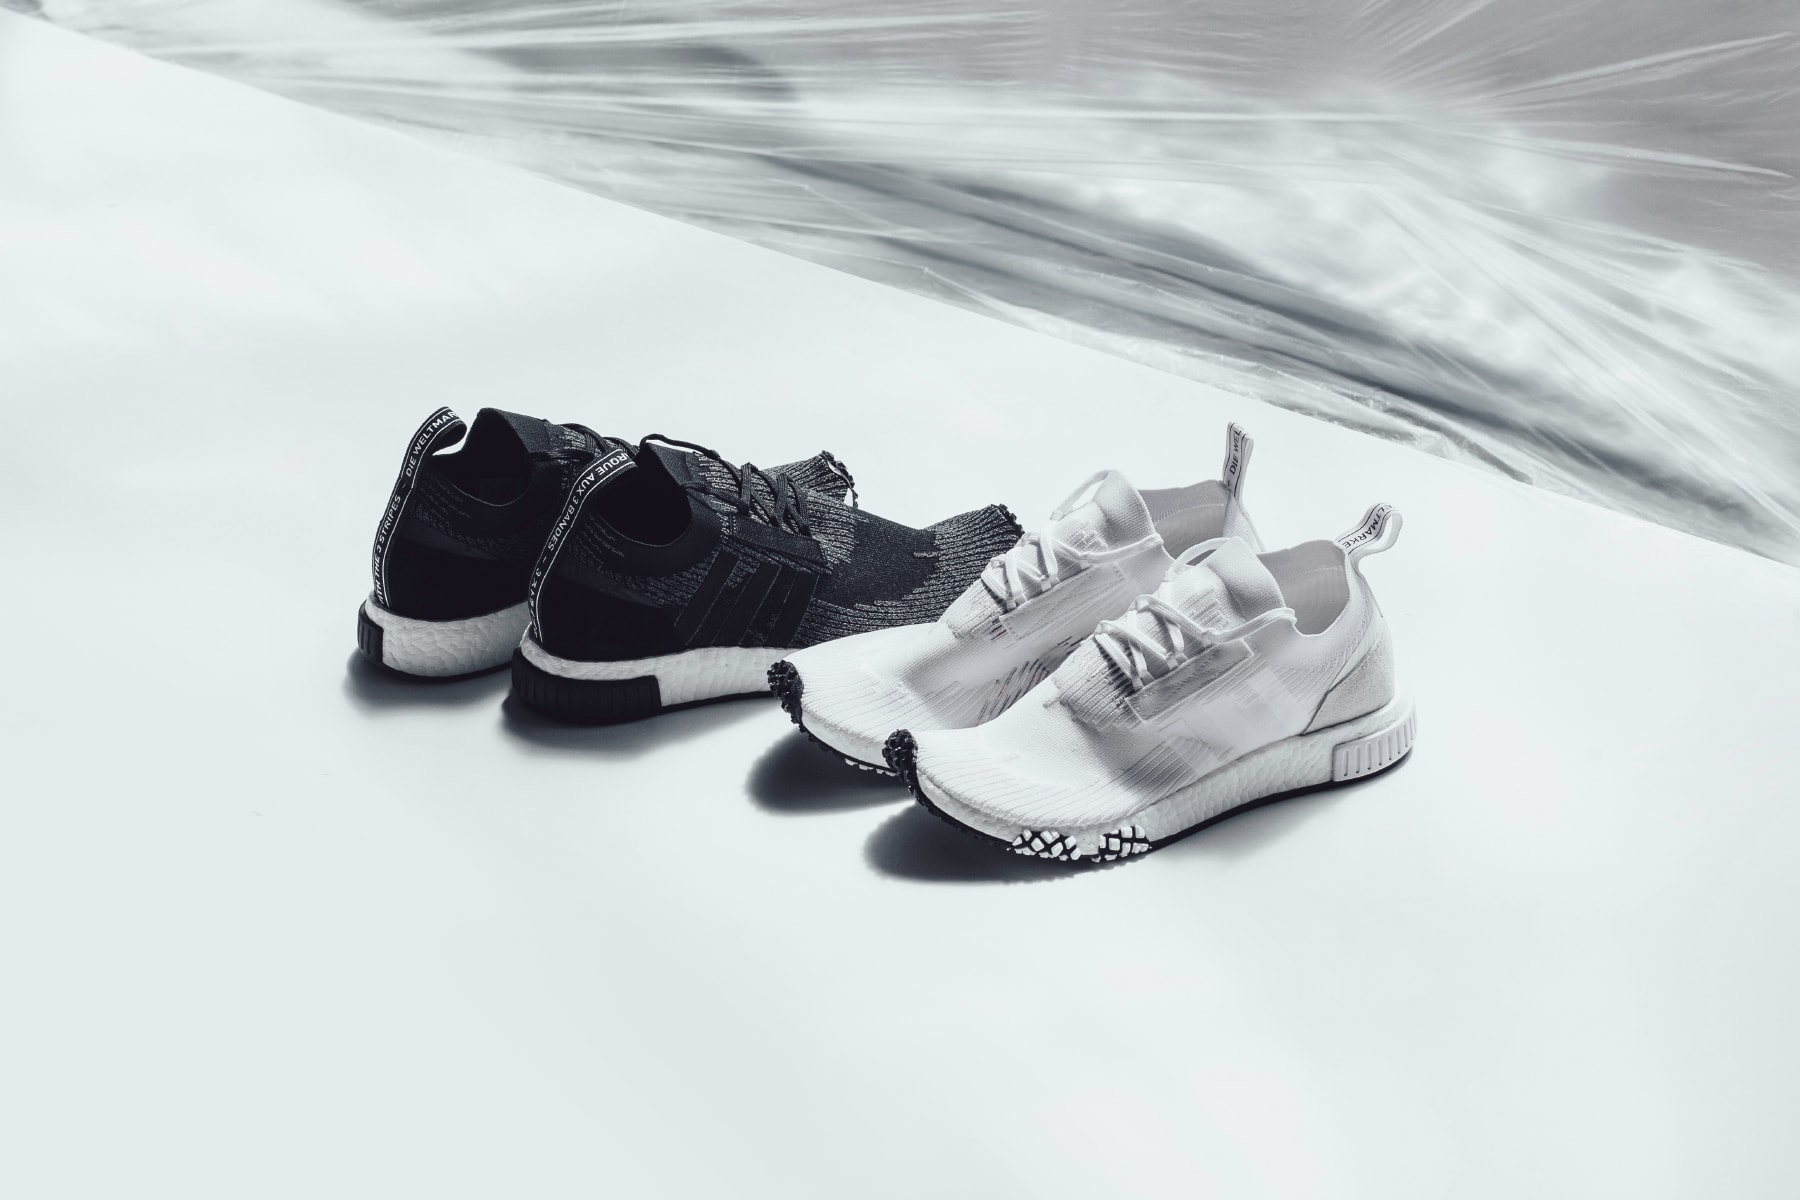 adidas NMD Racer "Monochrome" Collection Black White Sneaker